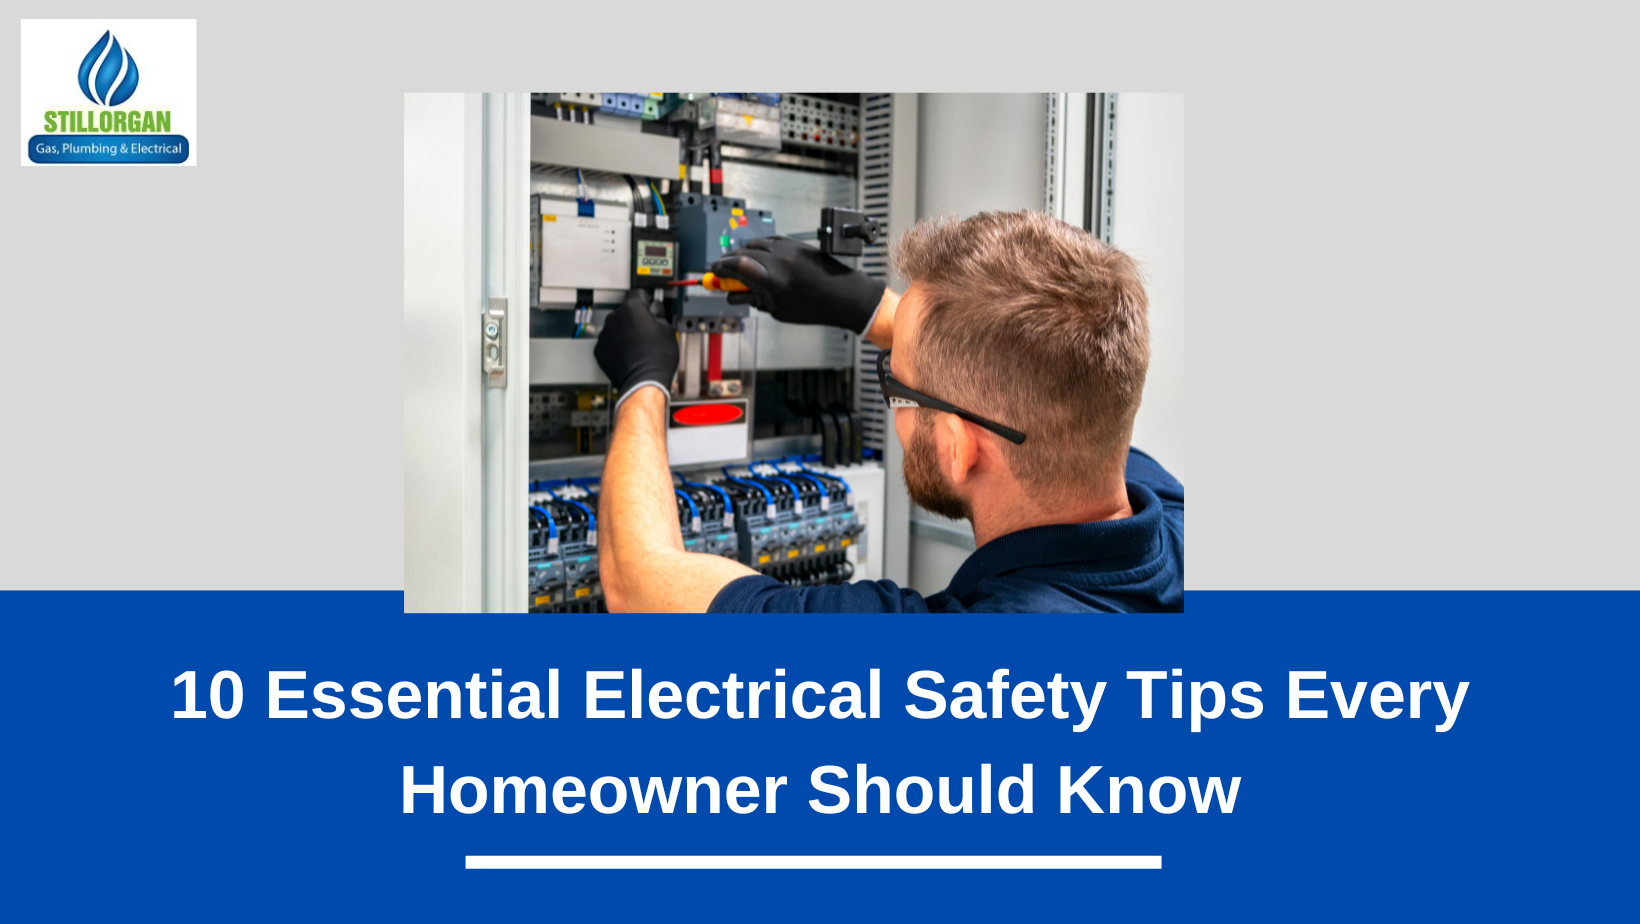 10 Essential Electrical Safety Tips Every Homeowner Should Know